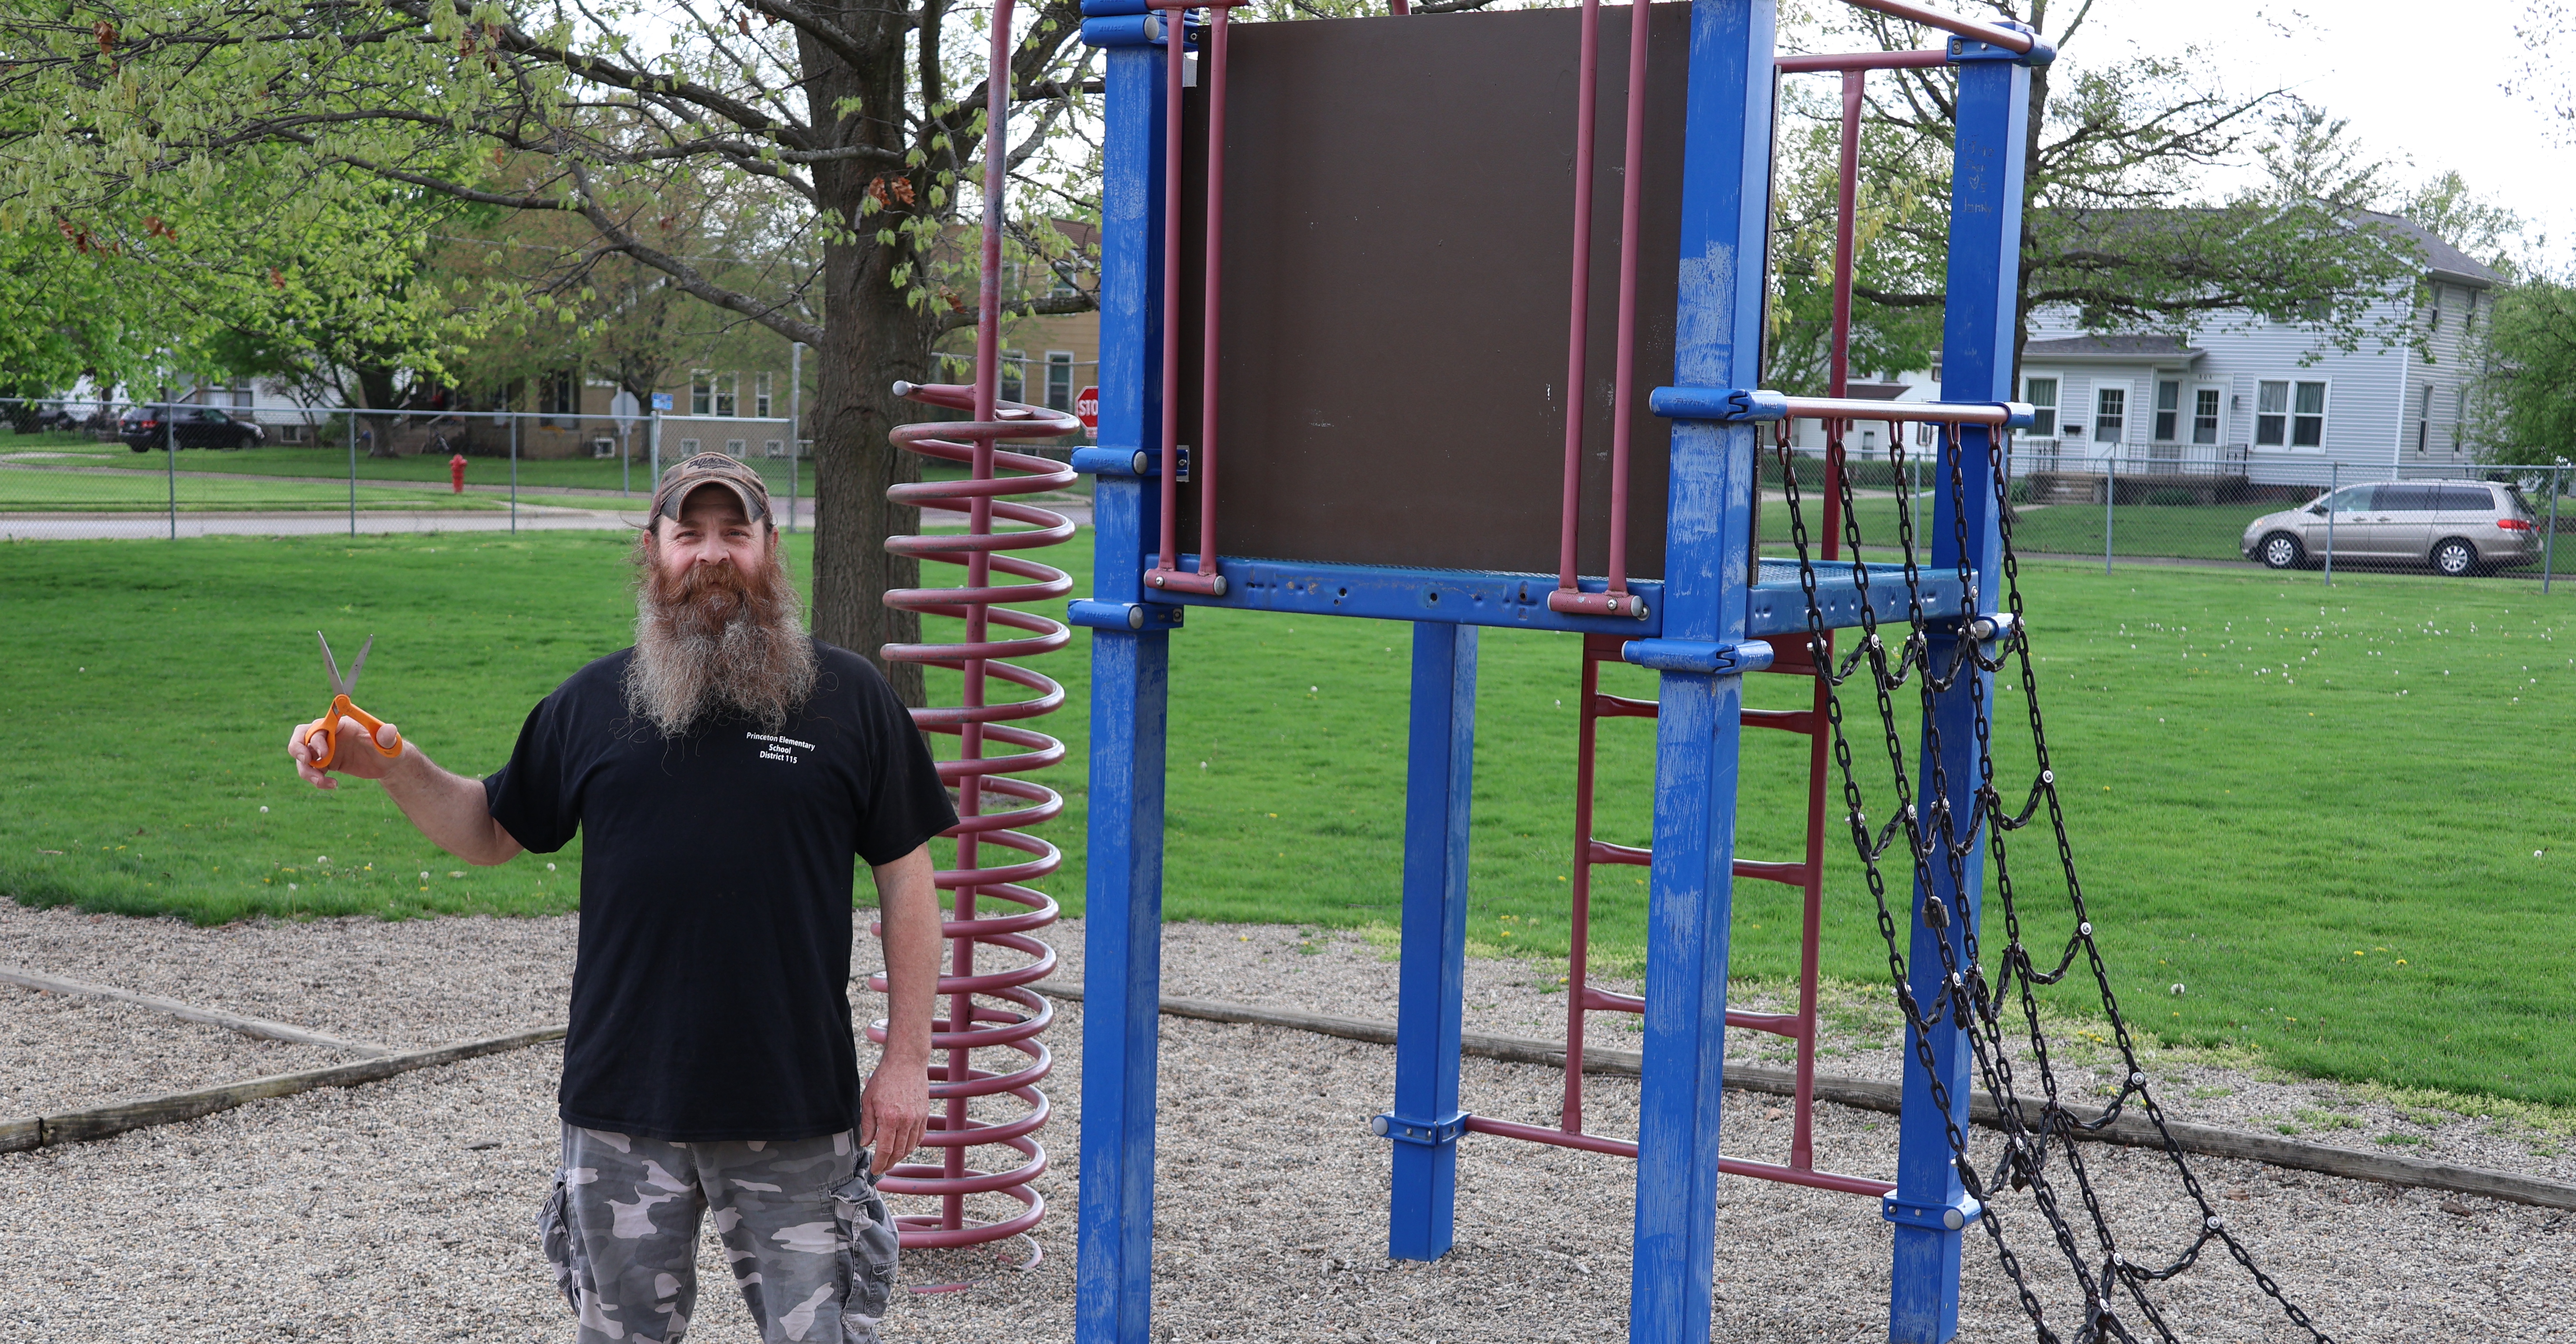 Custodian, Bob Espel, in front of old playground equipment with scissors in hand ready to cut his beard.